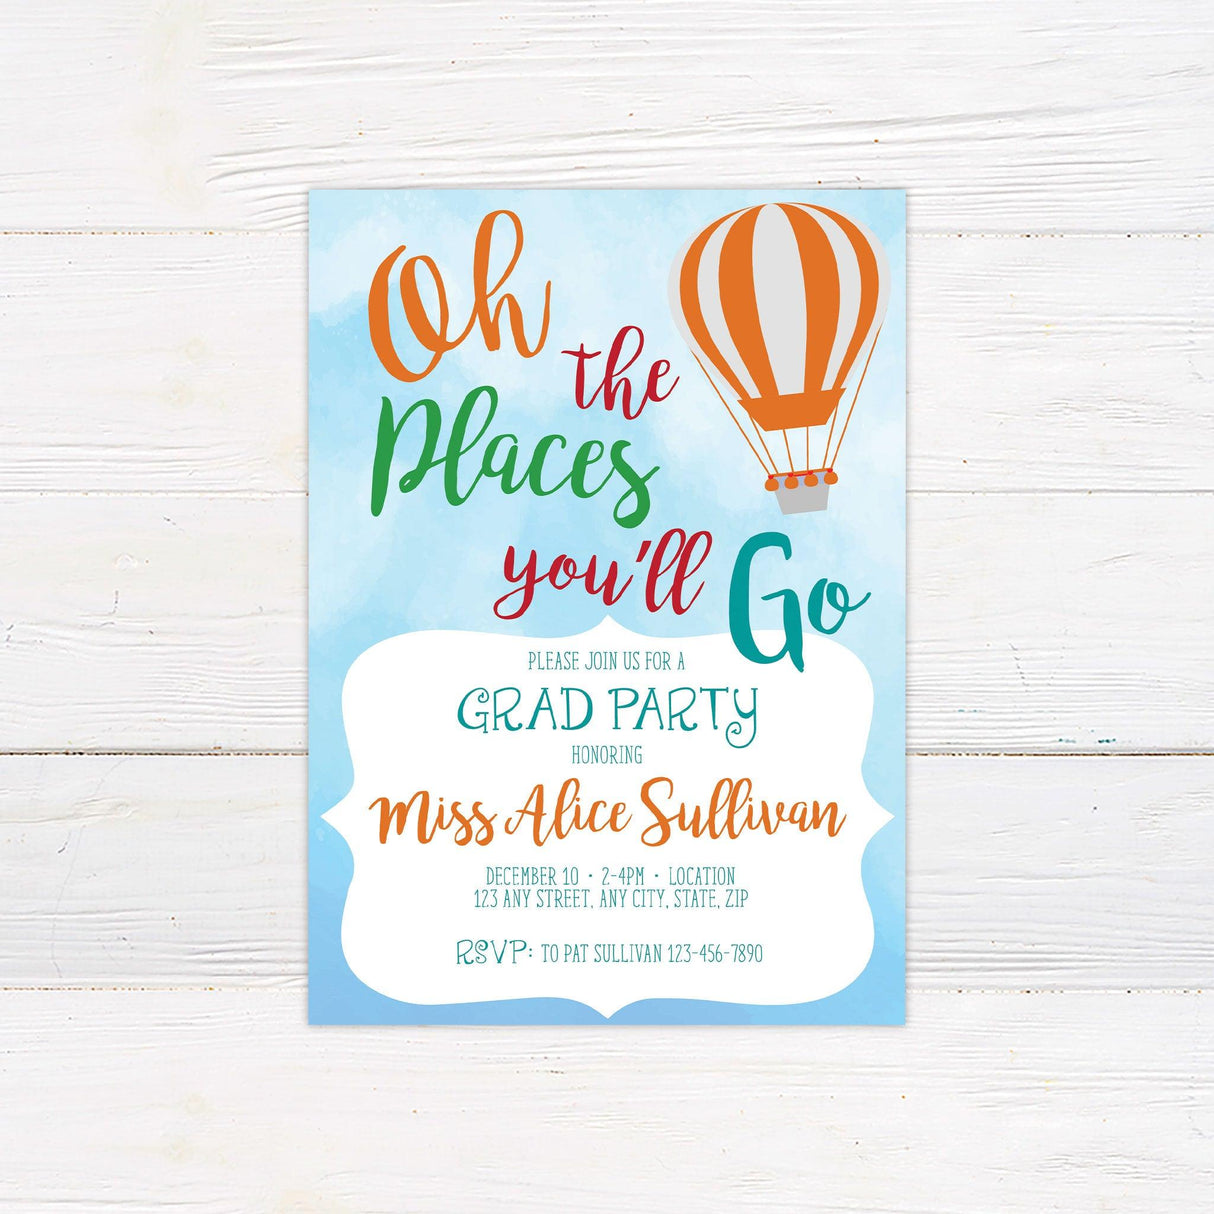 Oh the Places You'll Go - goprintplus